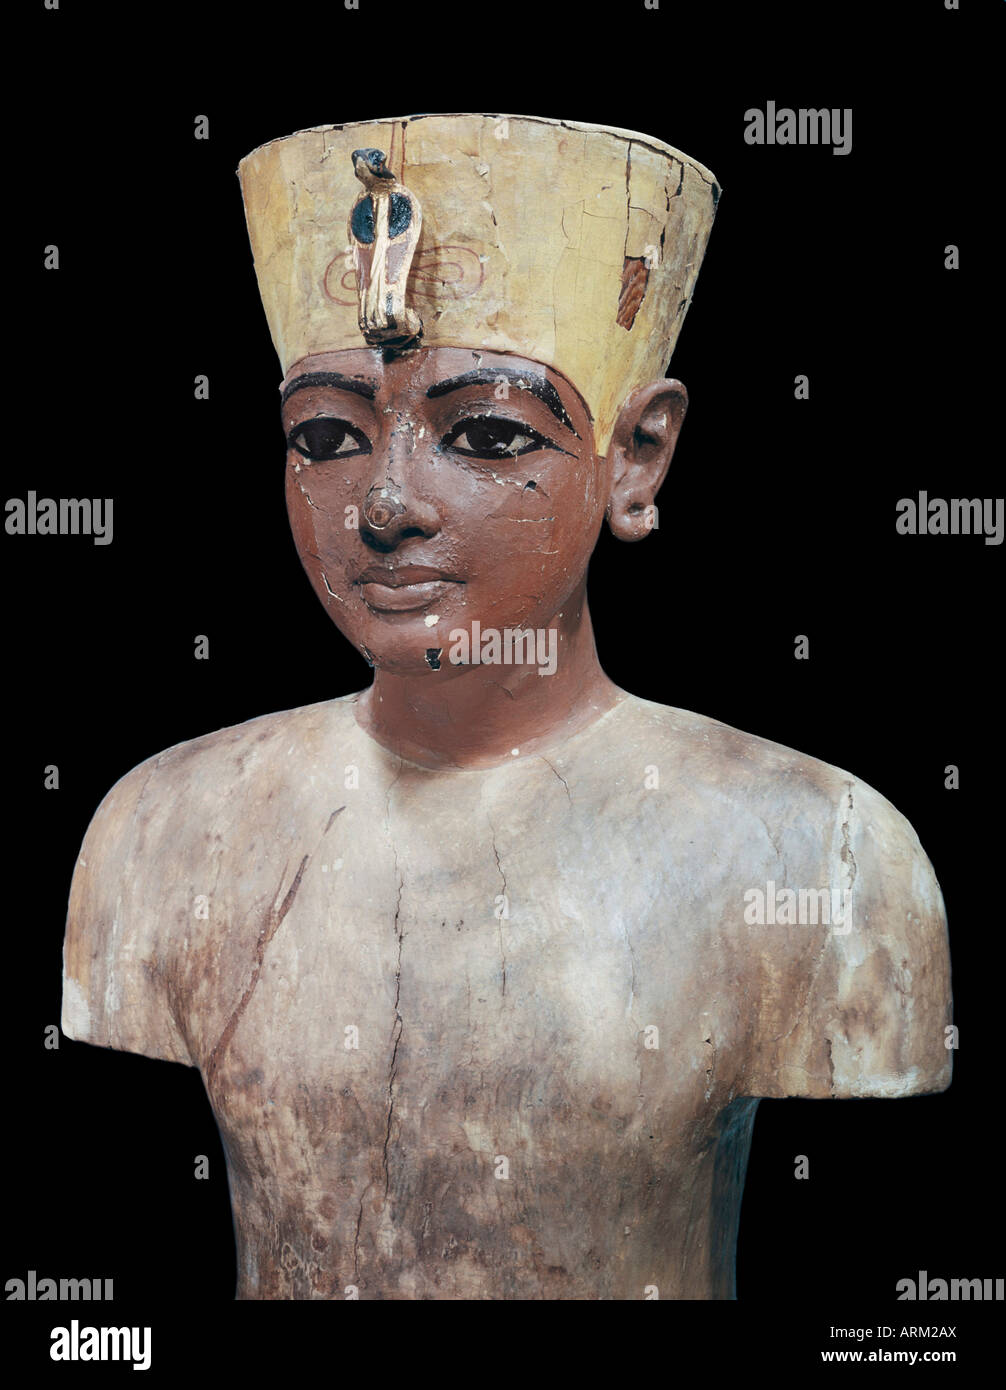 Dummy head of the young king, made from stuccoed and painted wood, from the tomb of the pharaoh Tutankhamun Stock Photo